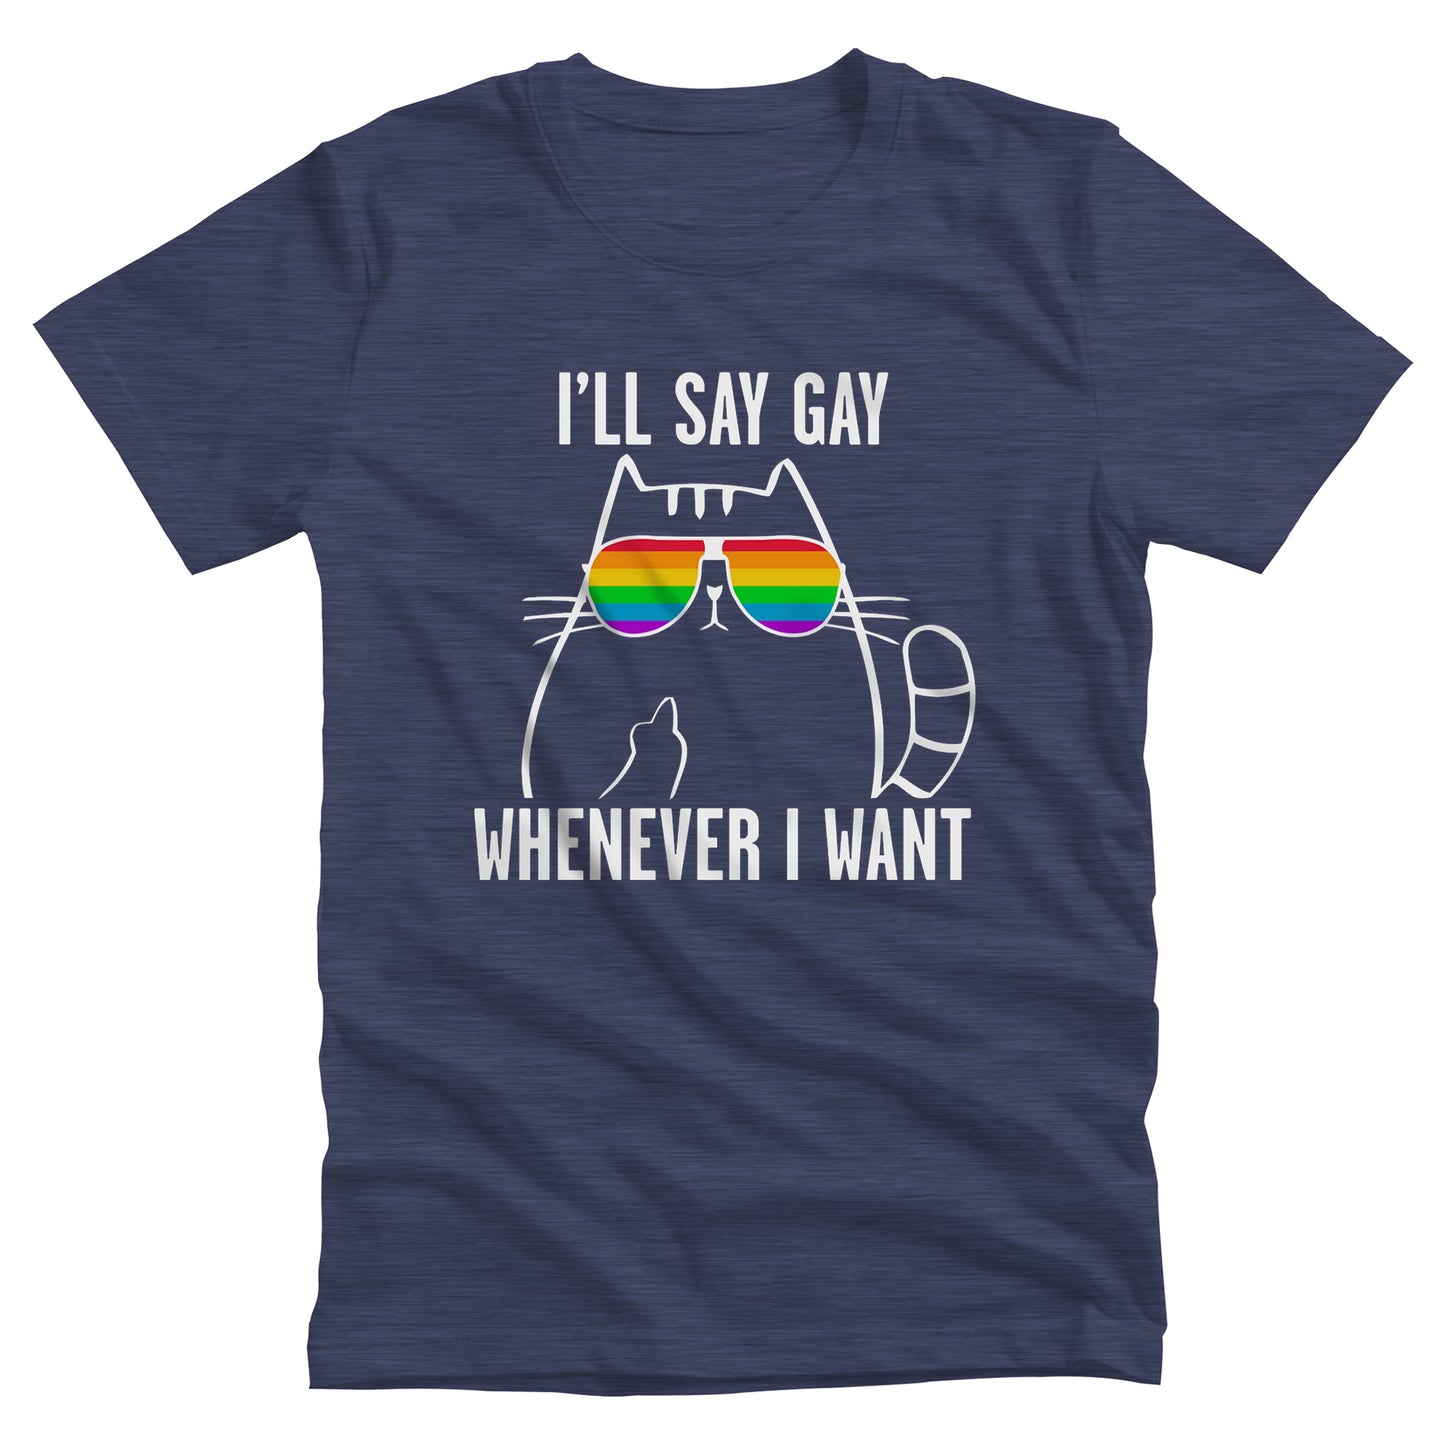 Heather Navy color unisex t-shirt with a graphic of a cat wearing rainbow sunglasses. The text says, “I’ll Say Gay Whenever I Want” with the words “I’ll say gay” above the graphic and the rest of the text below the graphic. The cat is also holding up its middle finger.